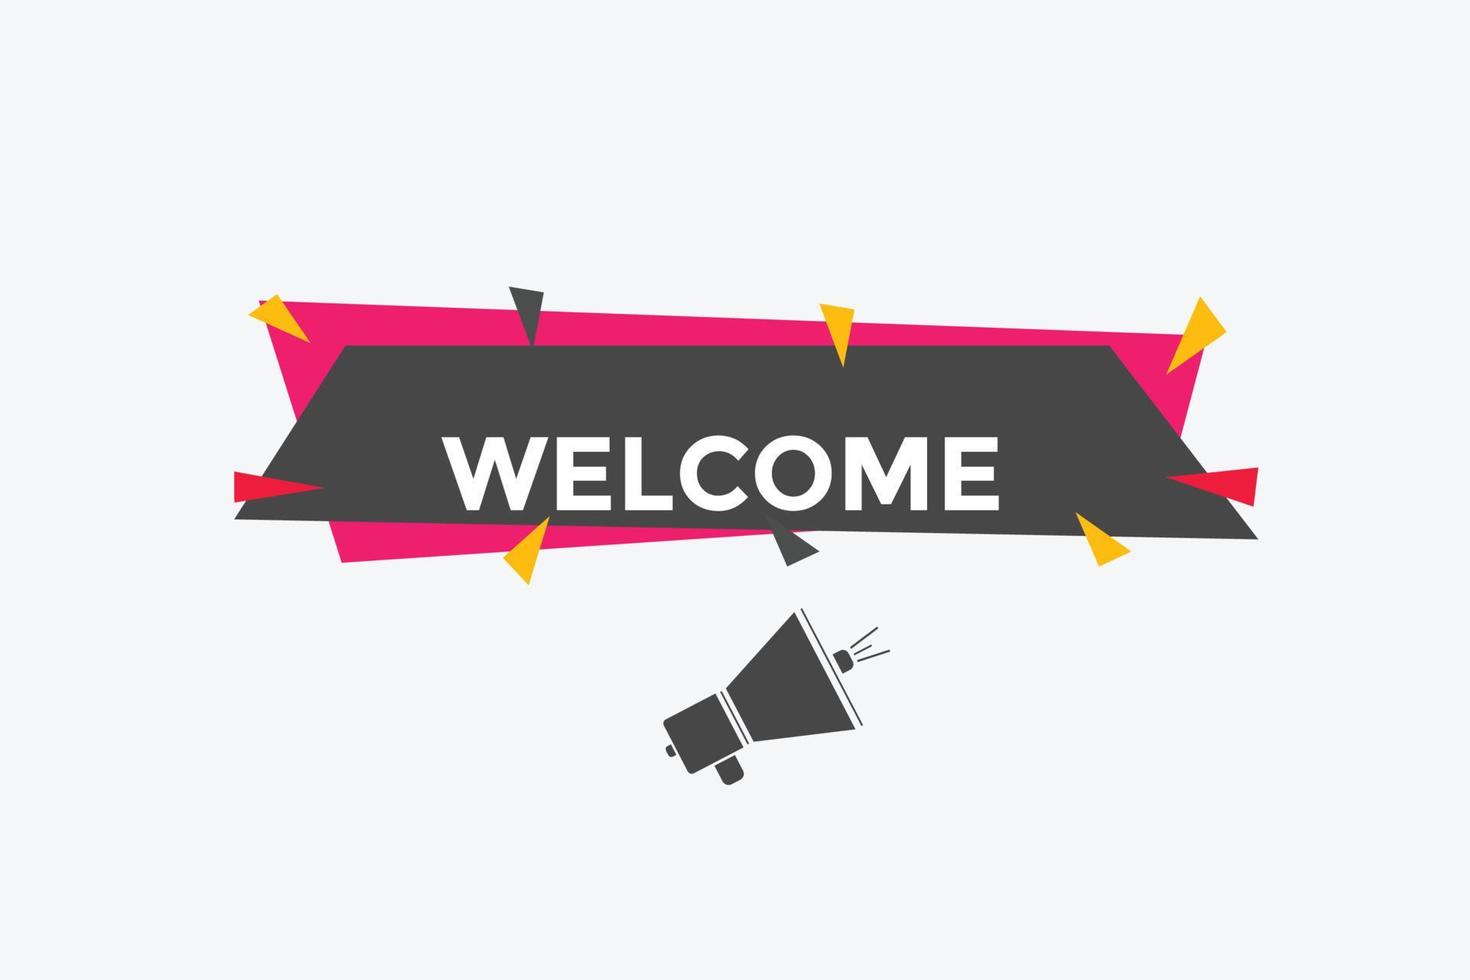 welcome text button. speech bubble. welcome Colorful web banner. vector illustration.